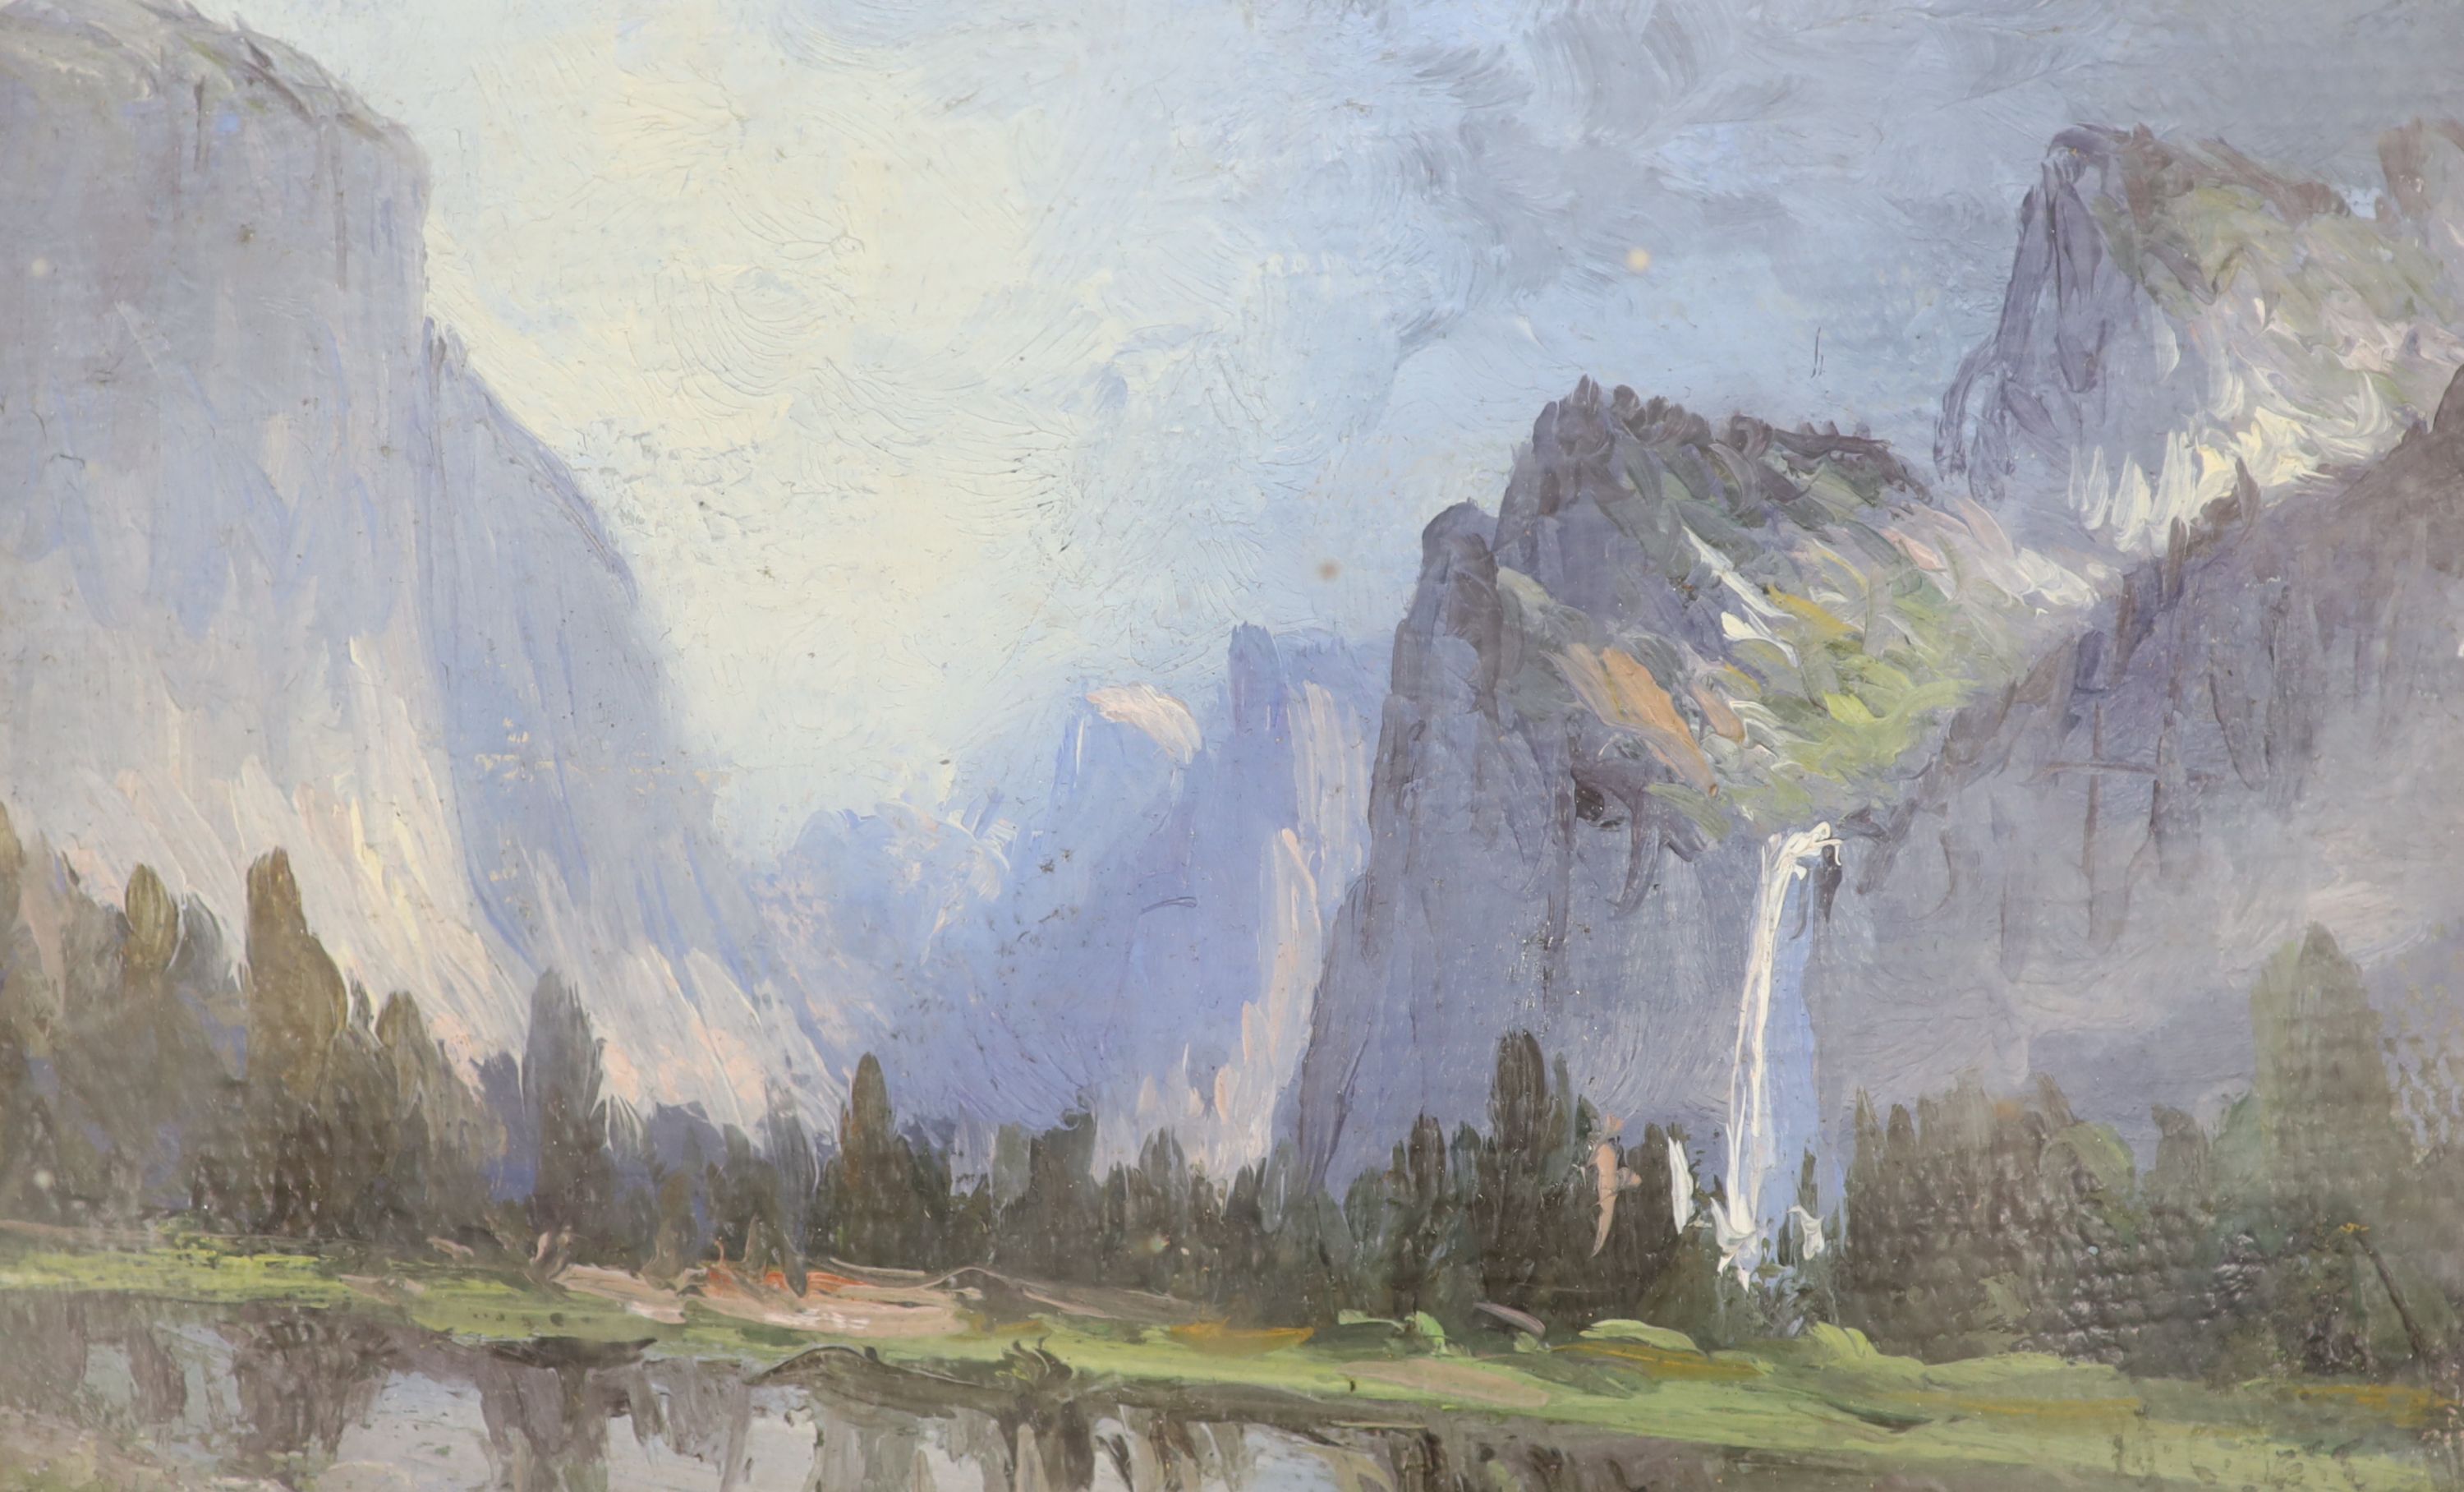 Arthur W. Best (American, 1859-1935), oil on canvas, 'Yossemite Valley, San Francisco', inscribed verso and dated 1912, 8 x 13cm